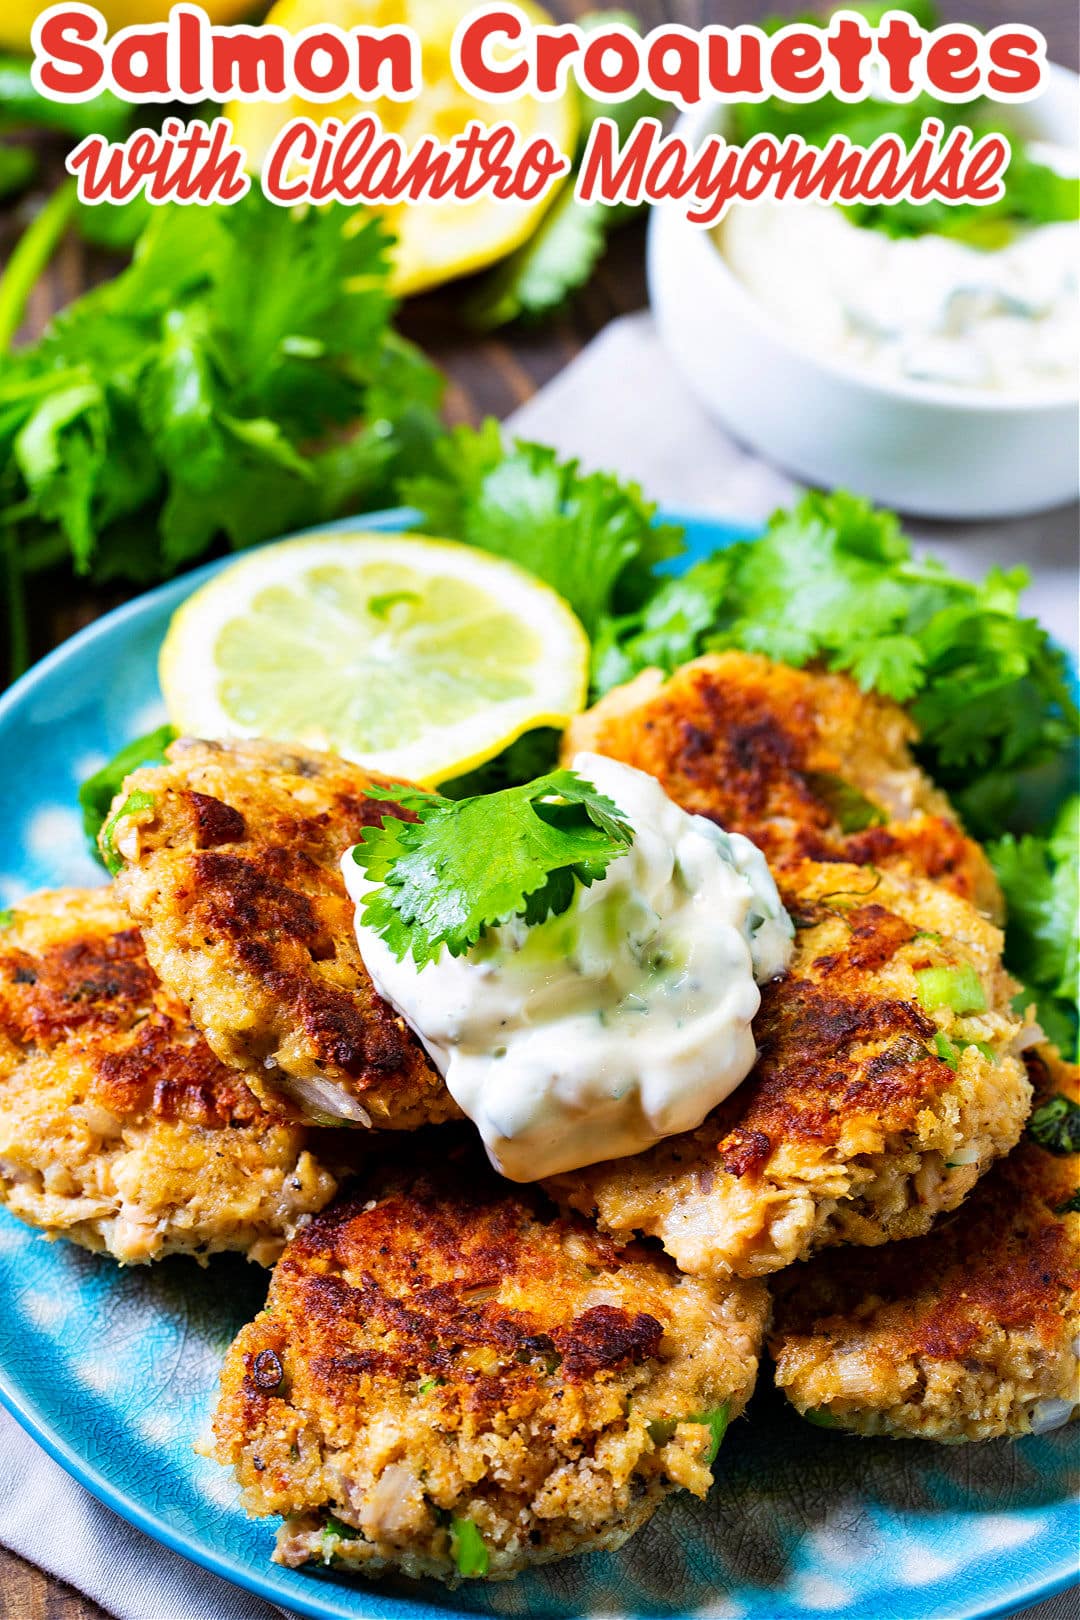 Salmon Croquettes with Cilantro Mayonnaise on a plate.